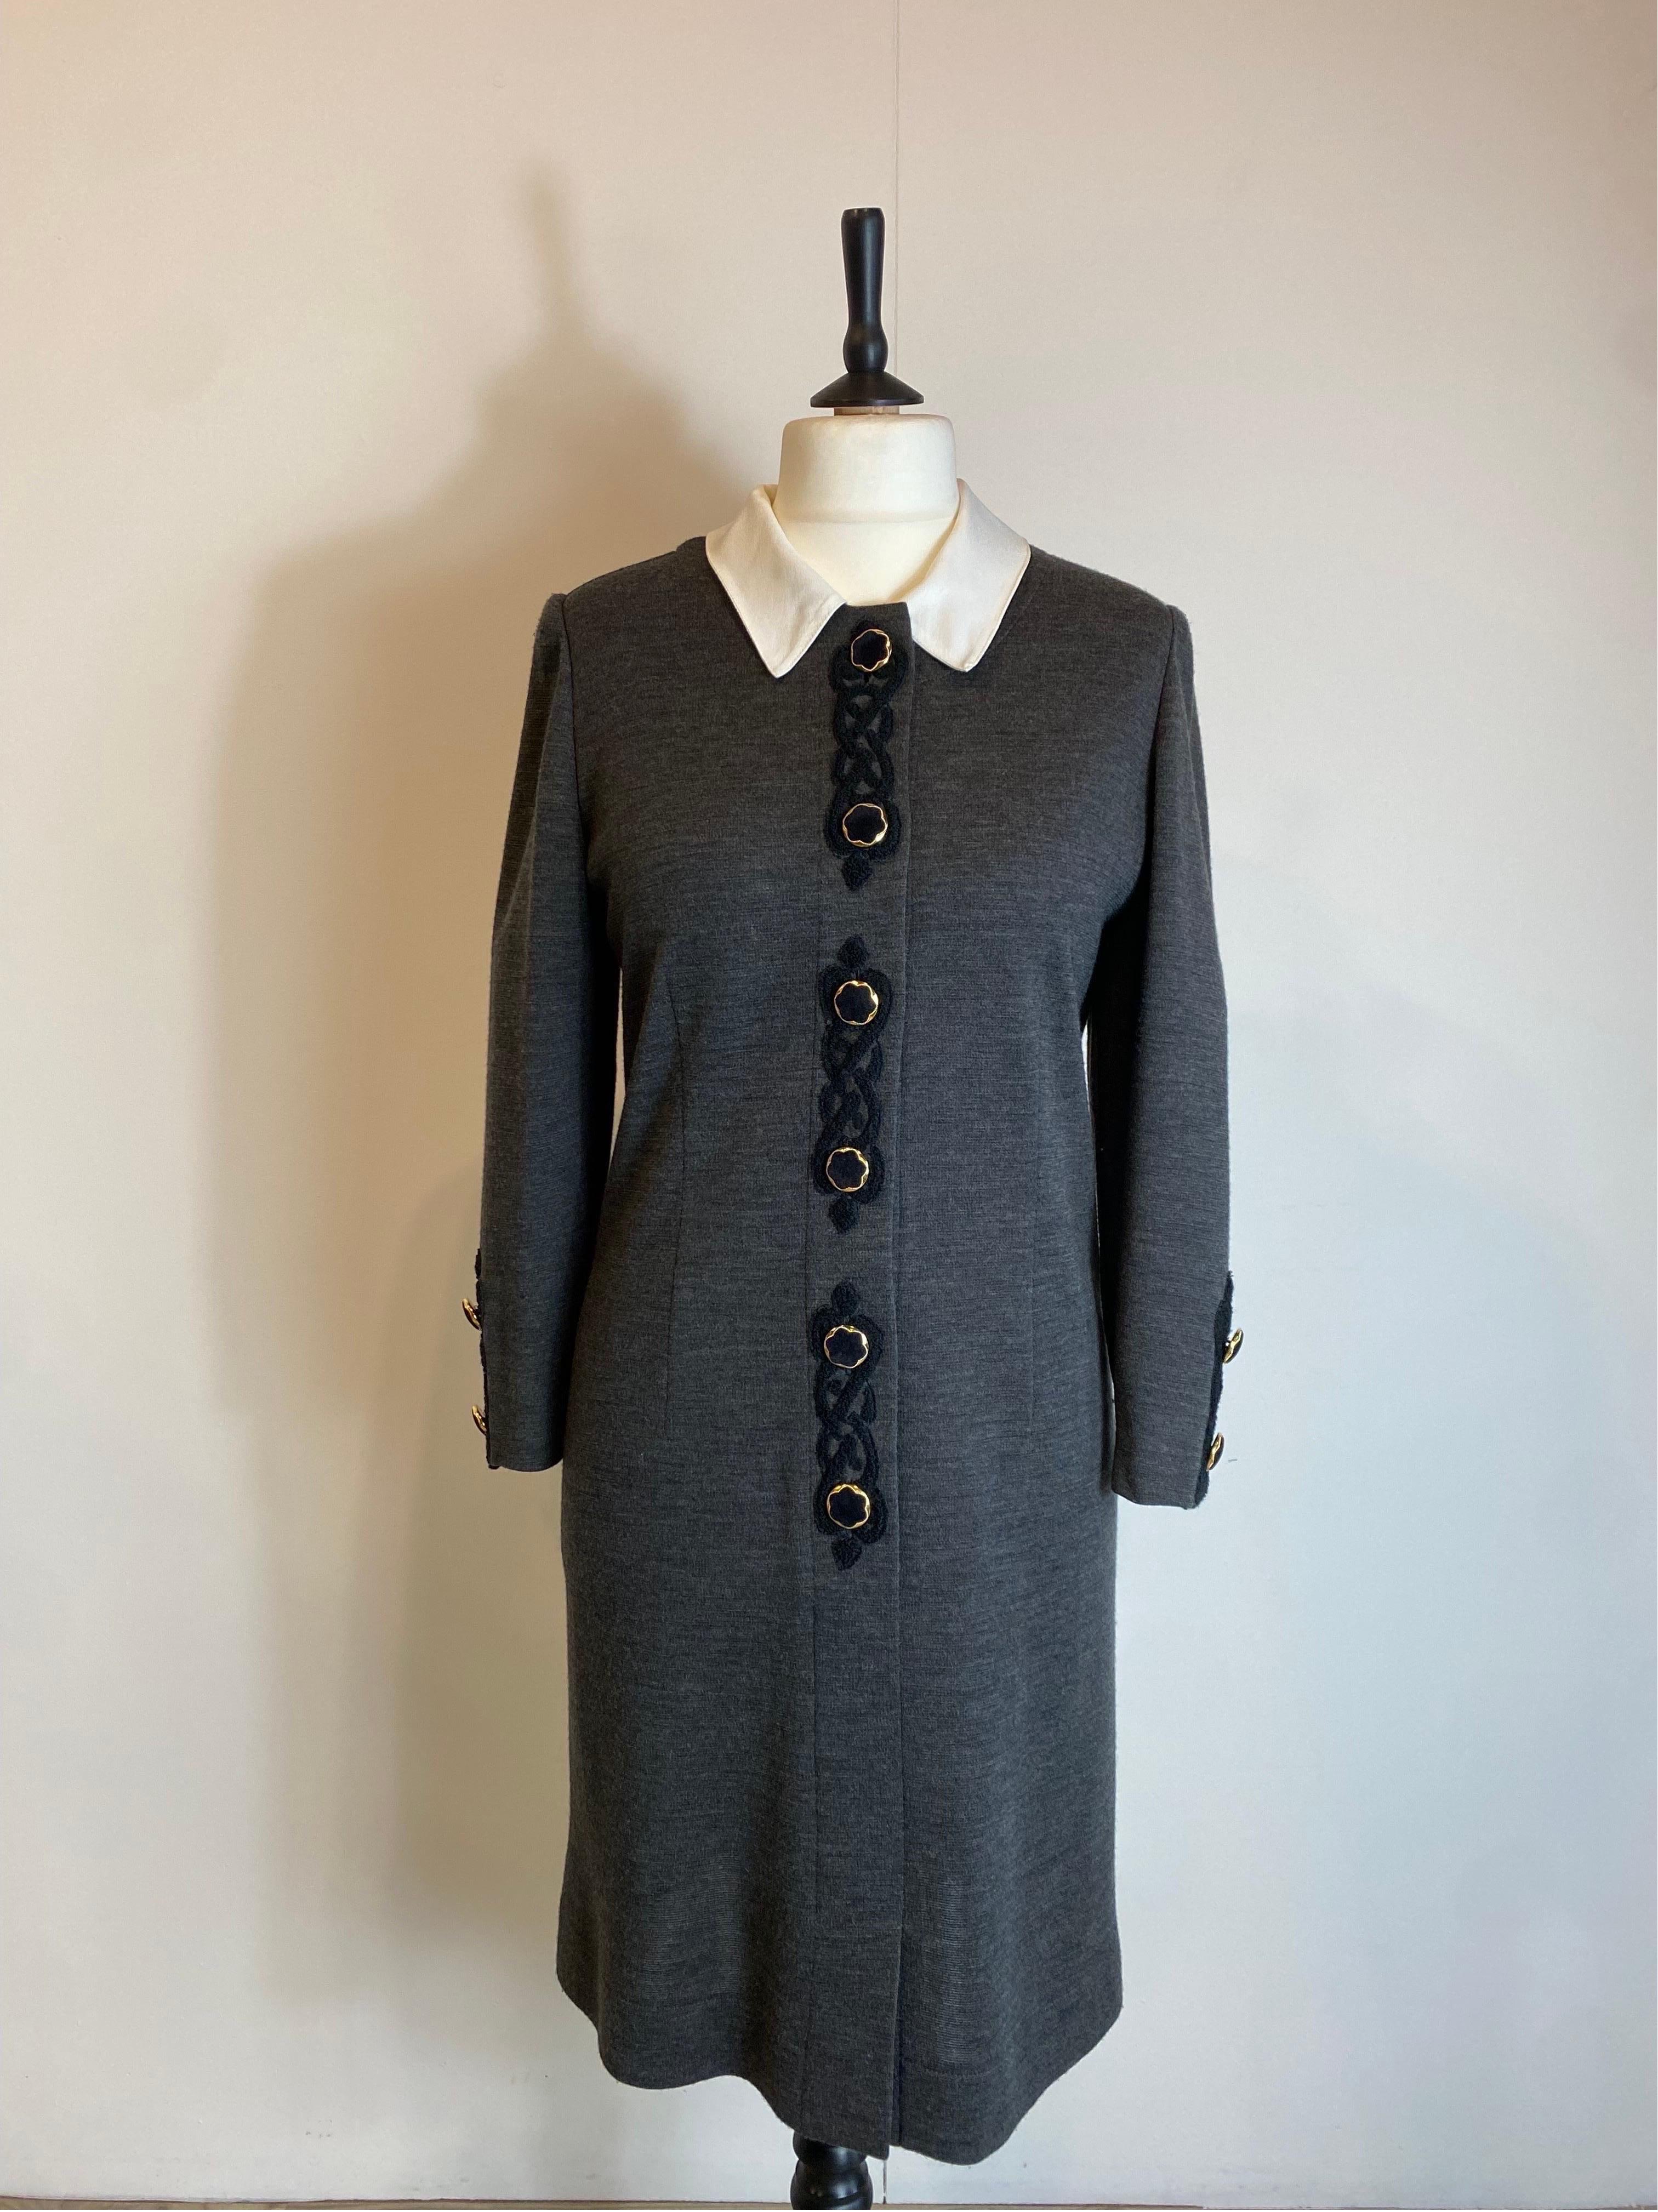 Pierre Cardin dress.
The composition label is missing but we think it is wool with silk collar.
The collar can be removed using the buttons if desired.
Features padded shoulder straps
Very nice buttons.
Italian size 44
Shoulders 44 cm
Bust 50